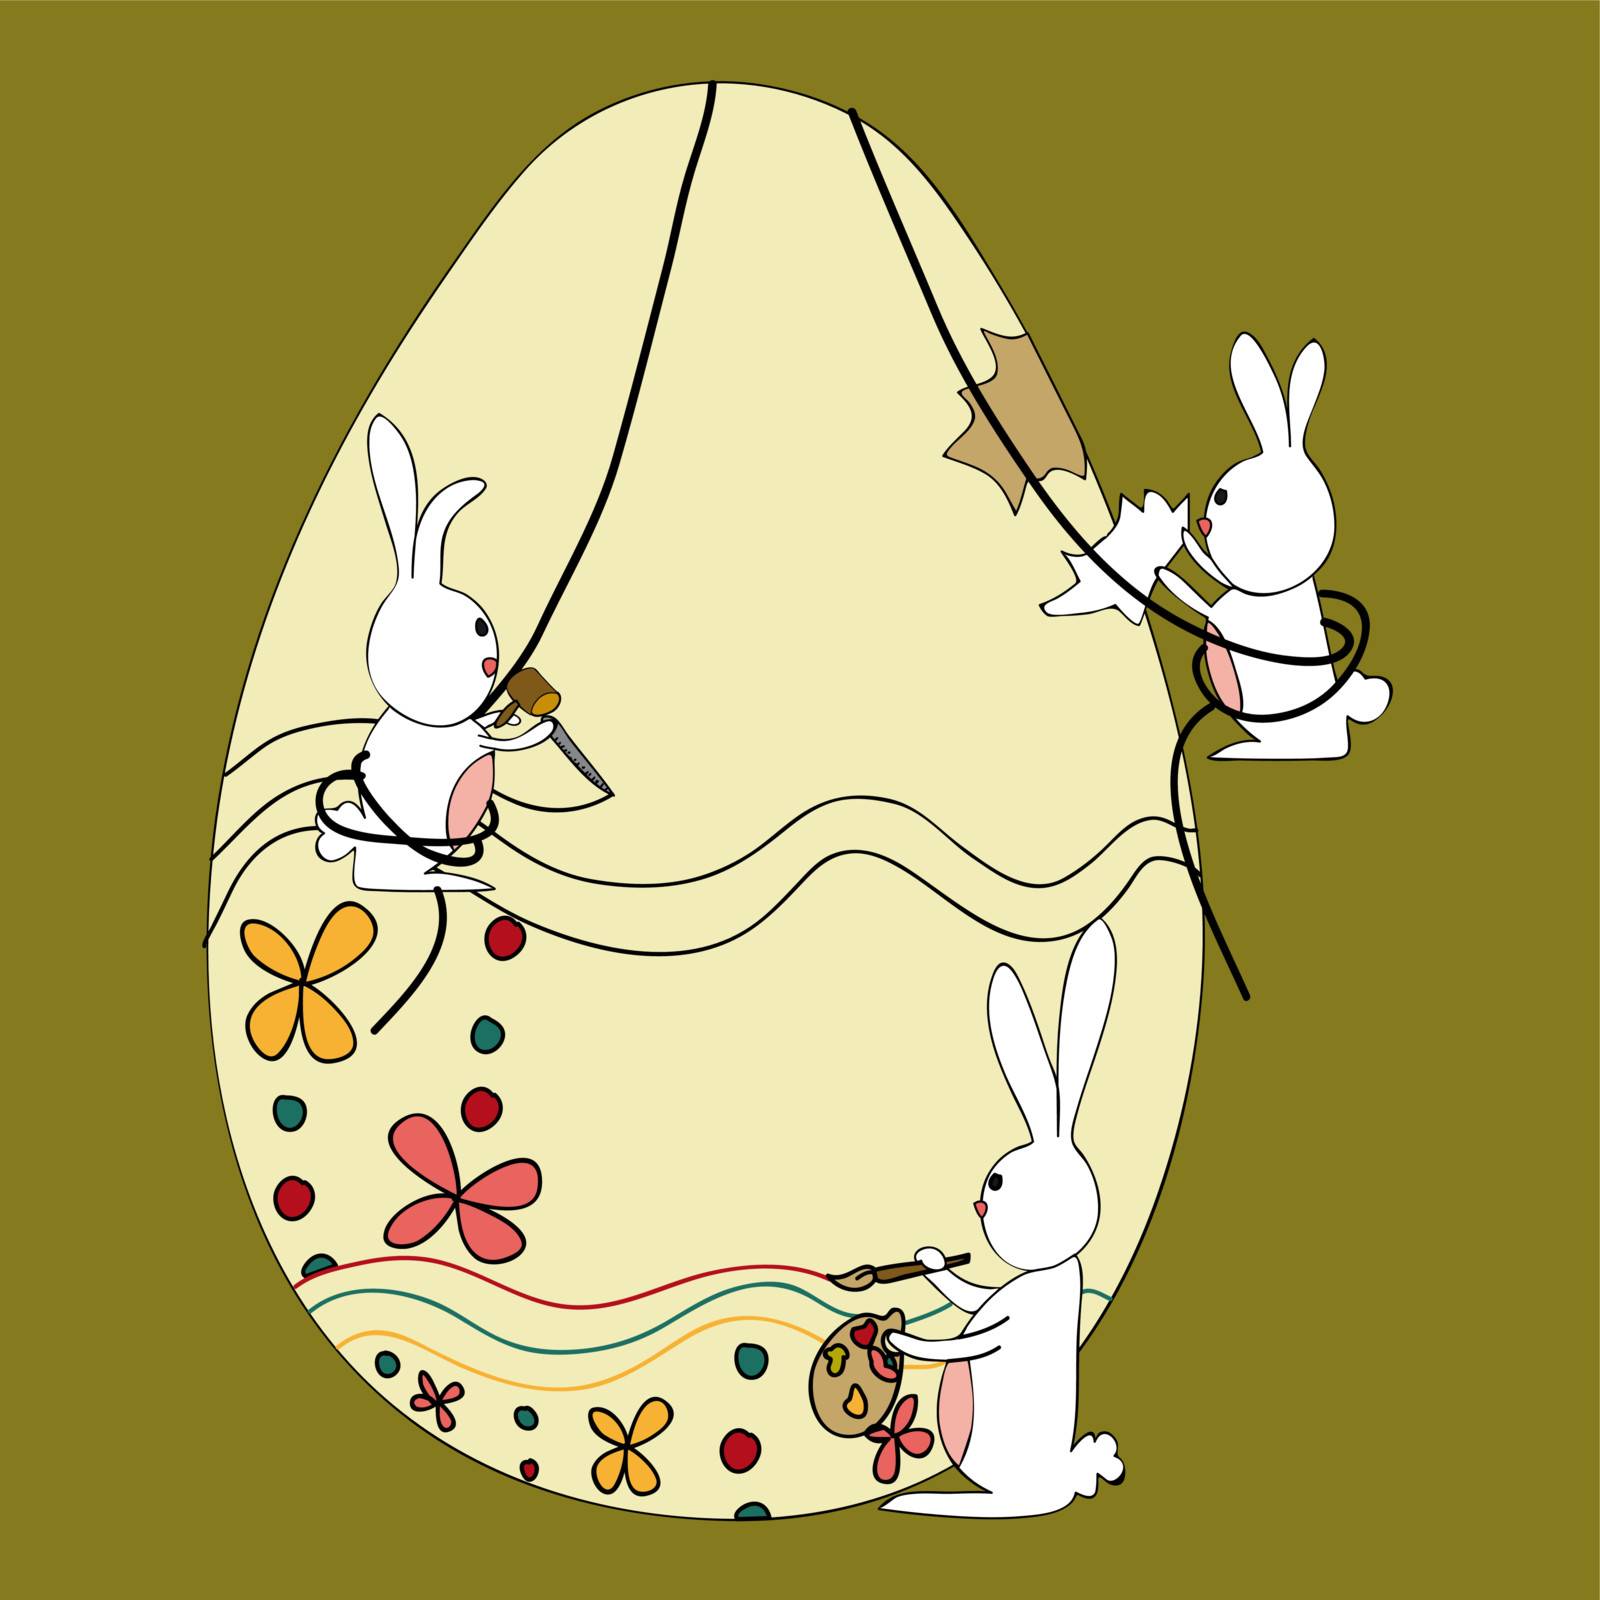 Decorative Easter egg under construction by bunnies team. This illustration is layered for easy manipulation and custom coloring.